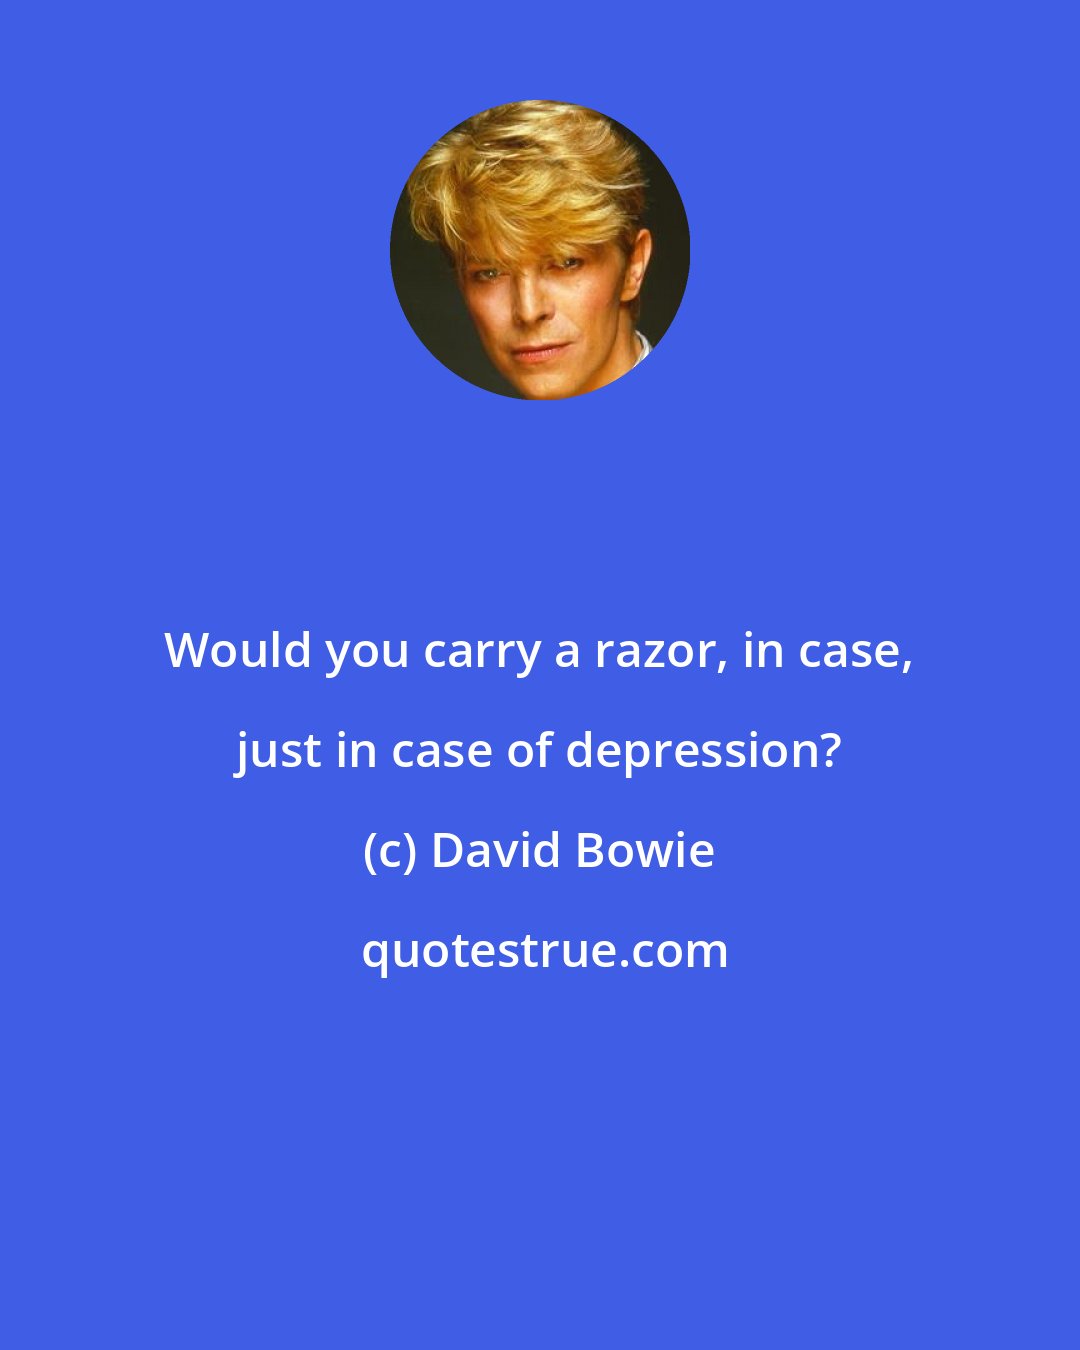 David Bowie: Would you carry a razor, in case, just in case of depression?